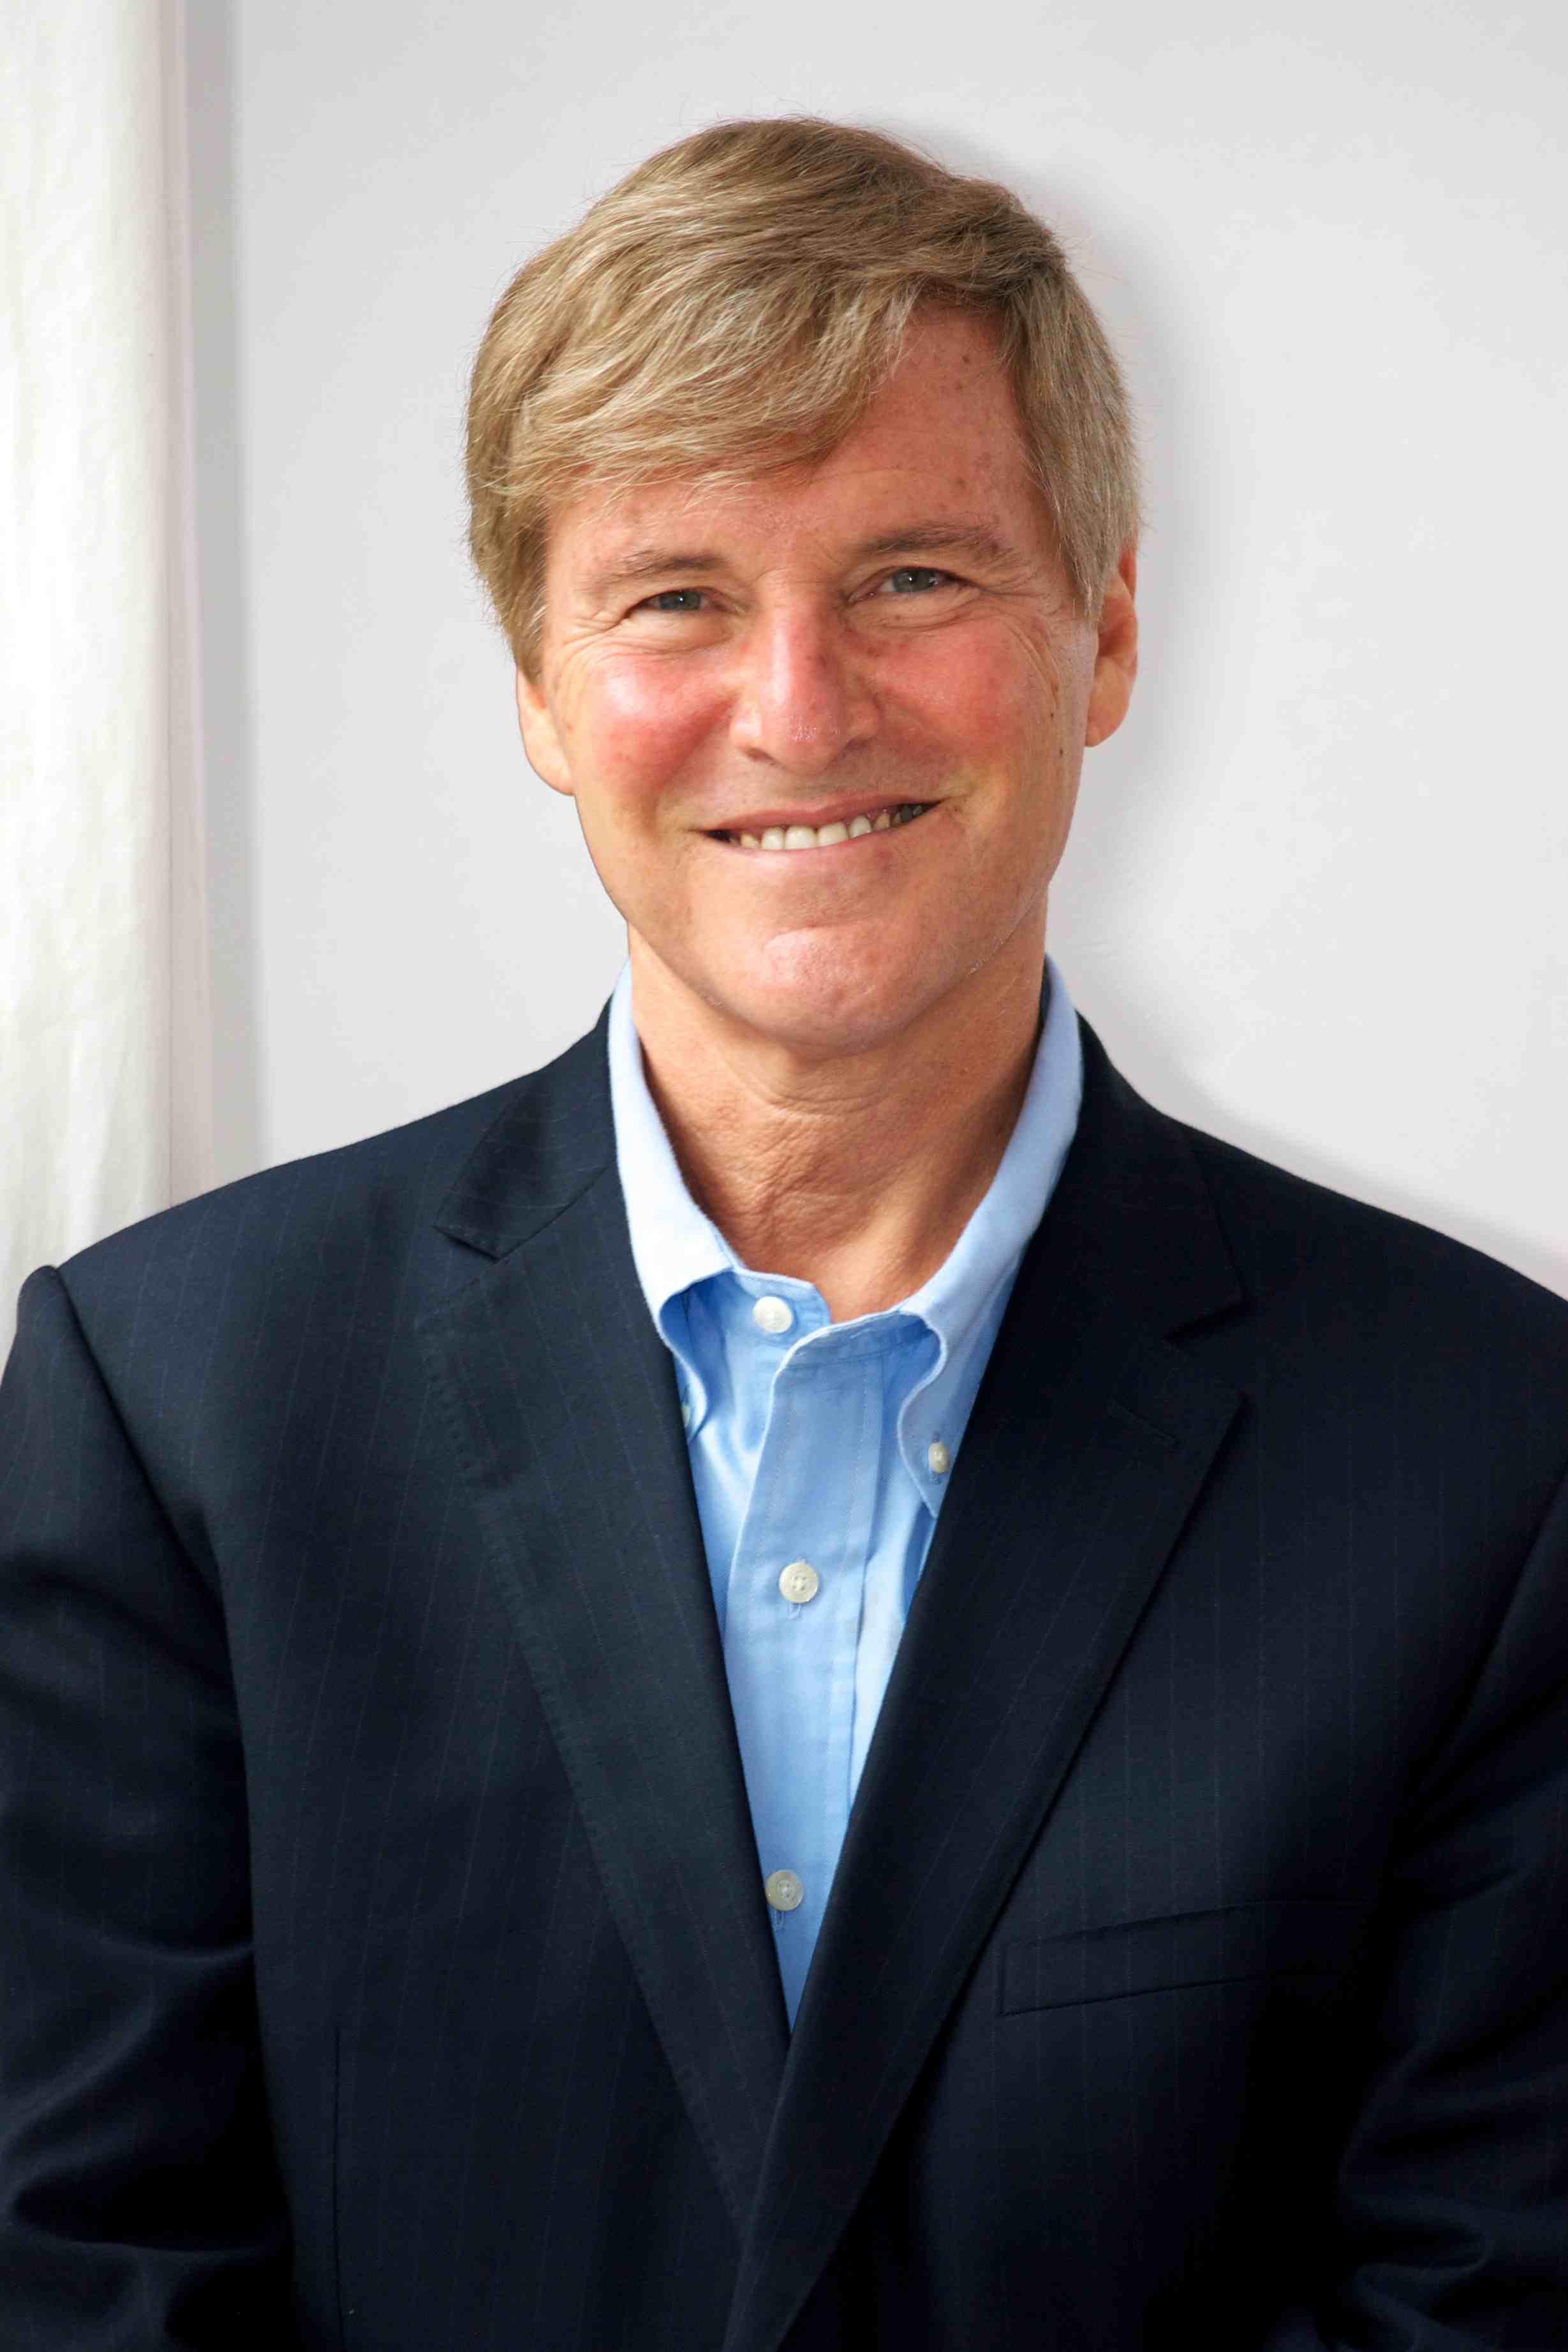 Super Agent Leigh Steinberg talks about his clients past and present plus why NFL TV ratings have dropped.